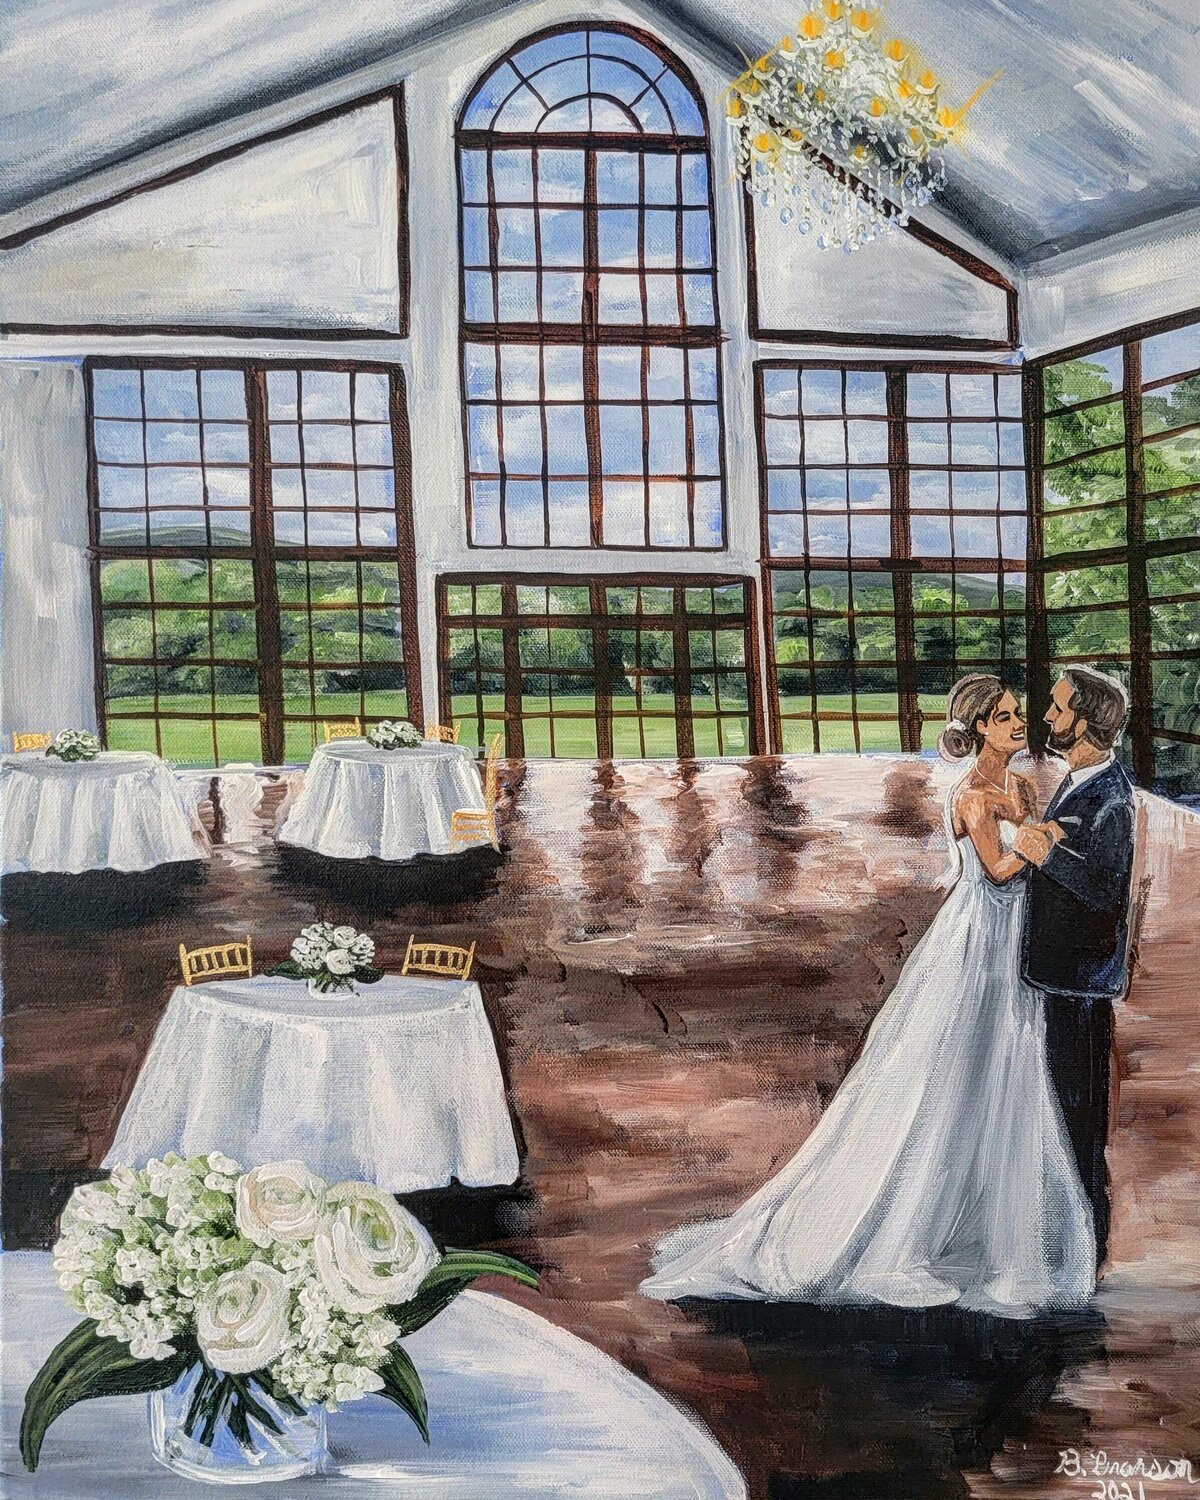 Summer live wedding painting at Raspberry Plain Manor in Leesburg, Virginia. Bride and groom share their first dance with the forest in the background.